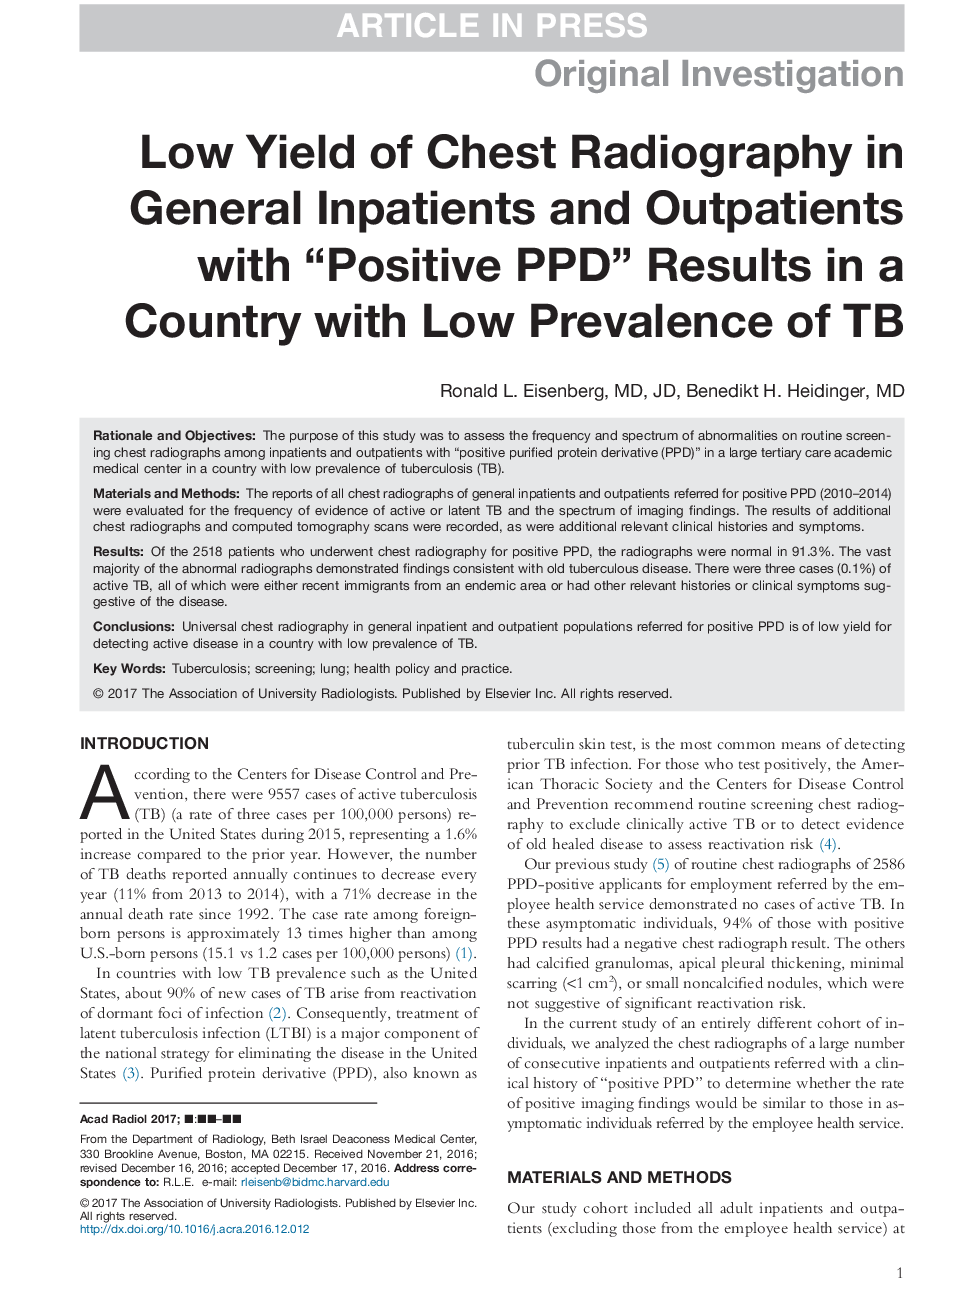 Low Yield of Chest Radiography in General Inpatients and Outpatients with “Positive PPD” Results in a Country with Low Prevalence of TB